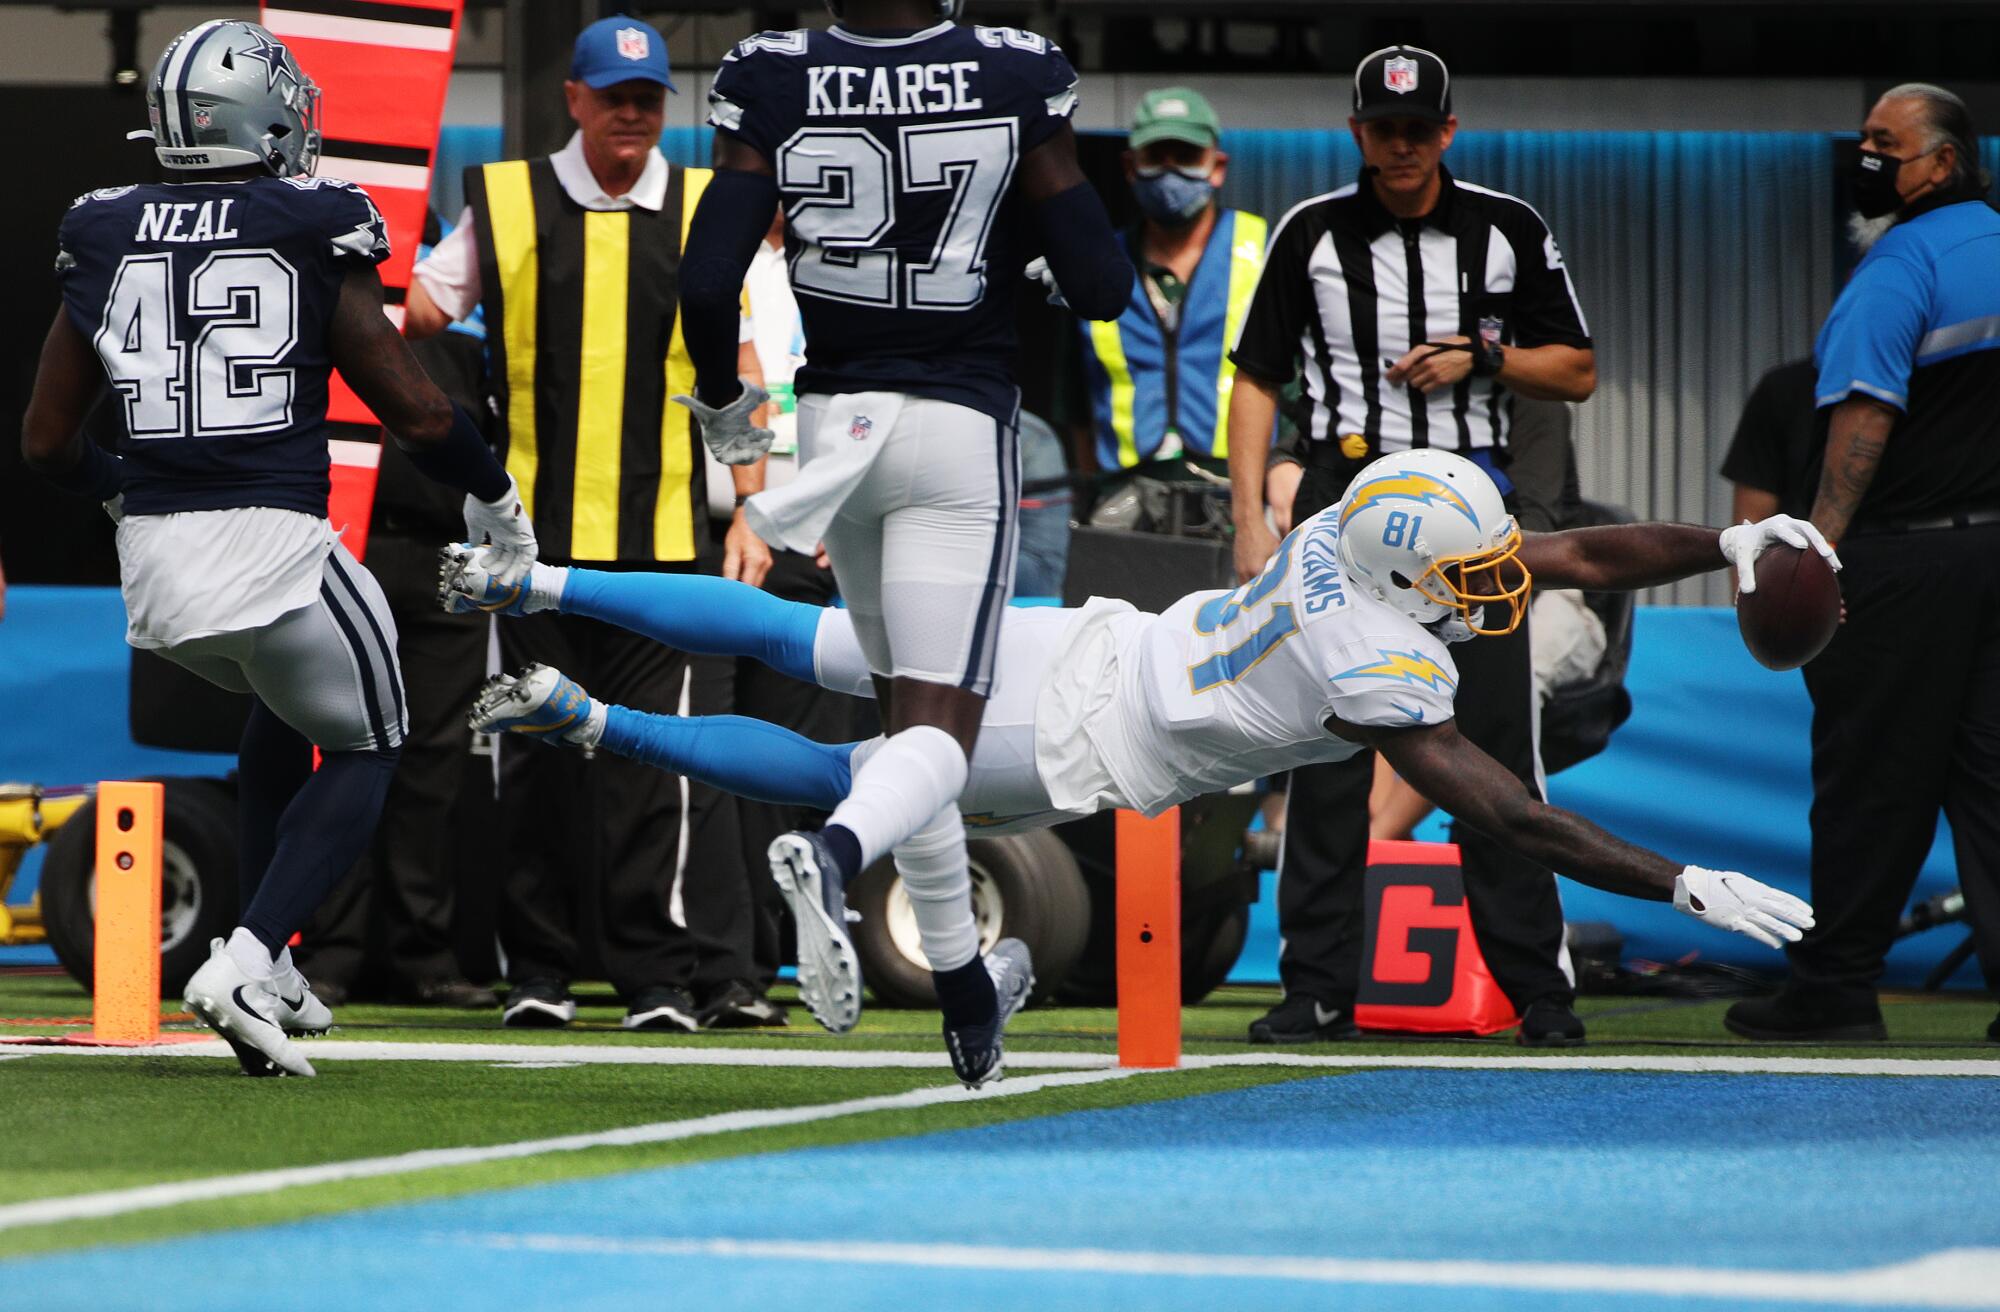 NFL photos: Cowboys defeat Chargers in SoFi Stadium thriller - Los